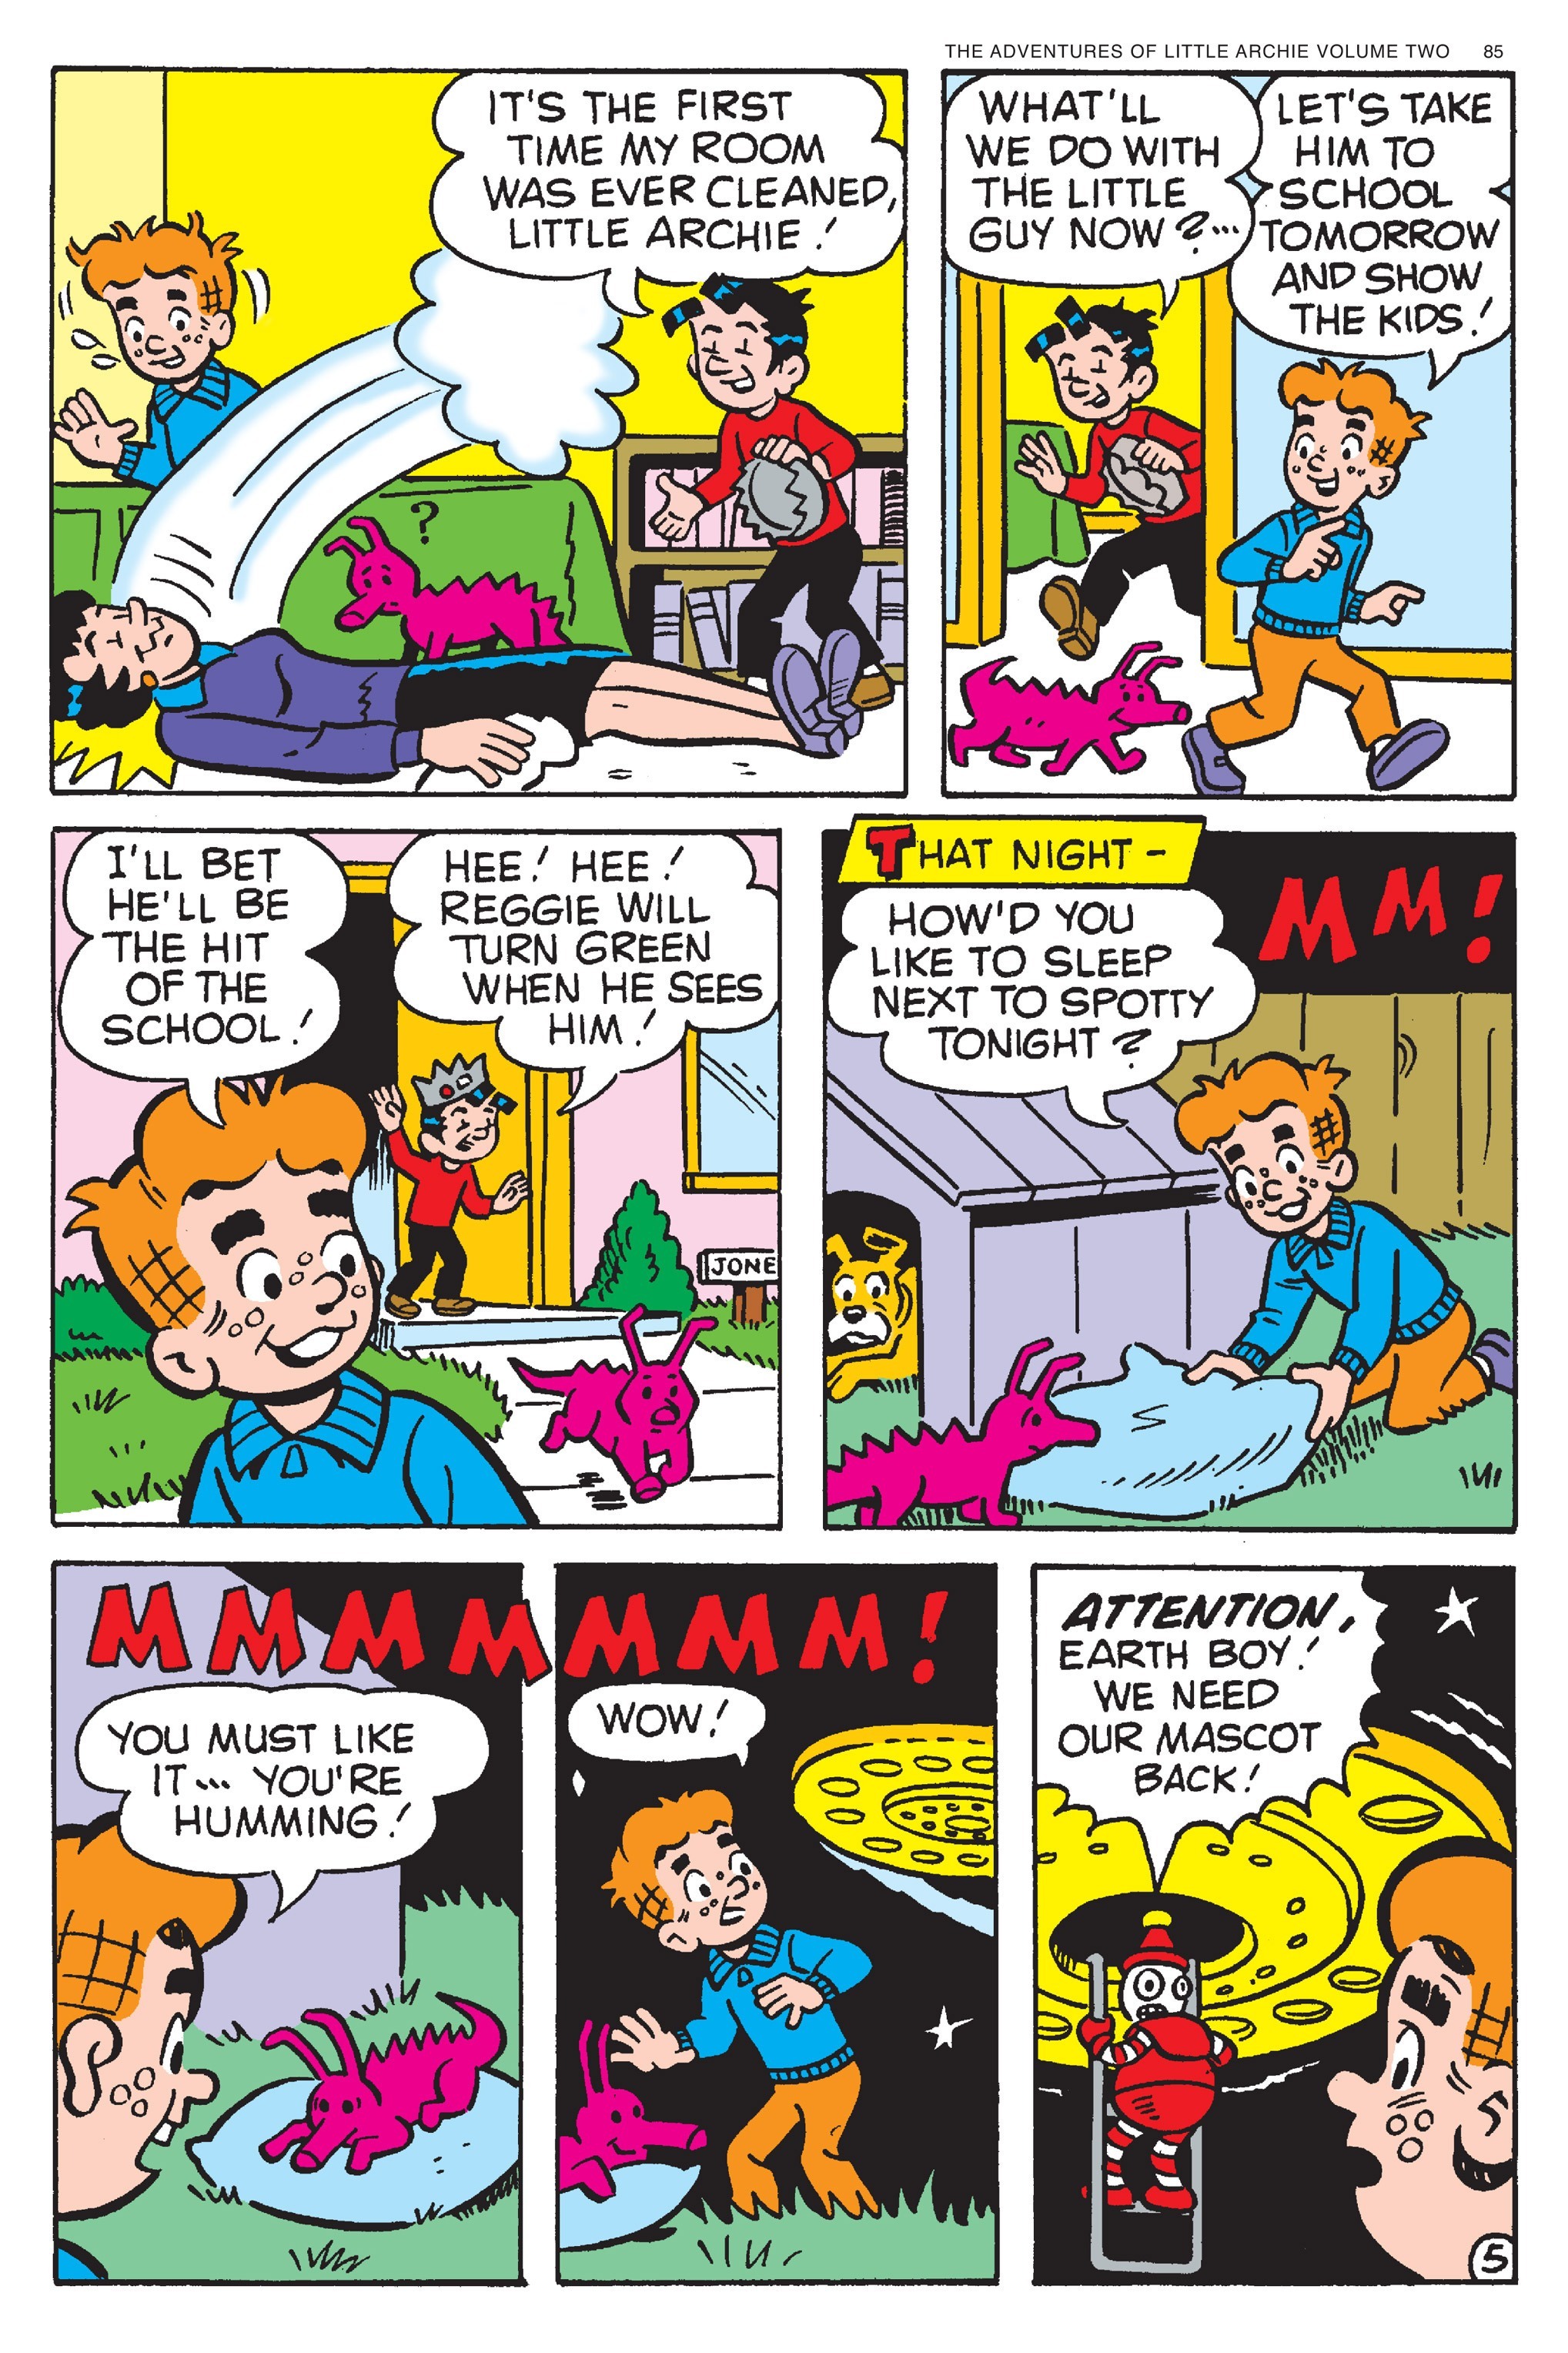 Read online Adventures of Little Archie comic -  Issue # TPB 2 - 86